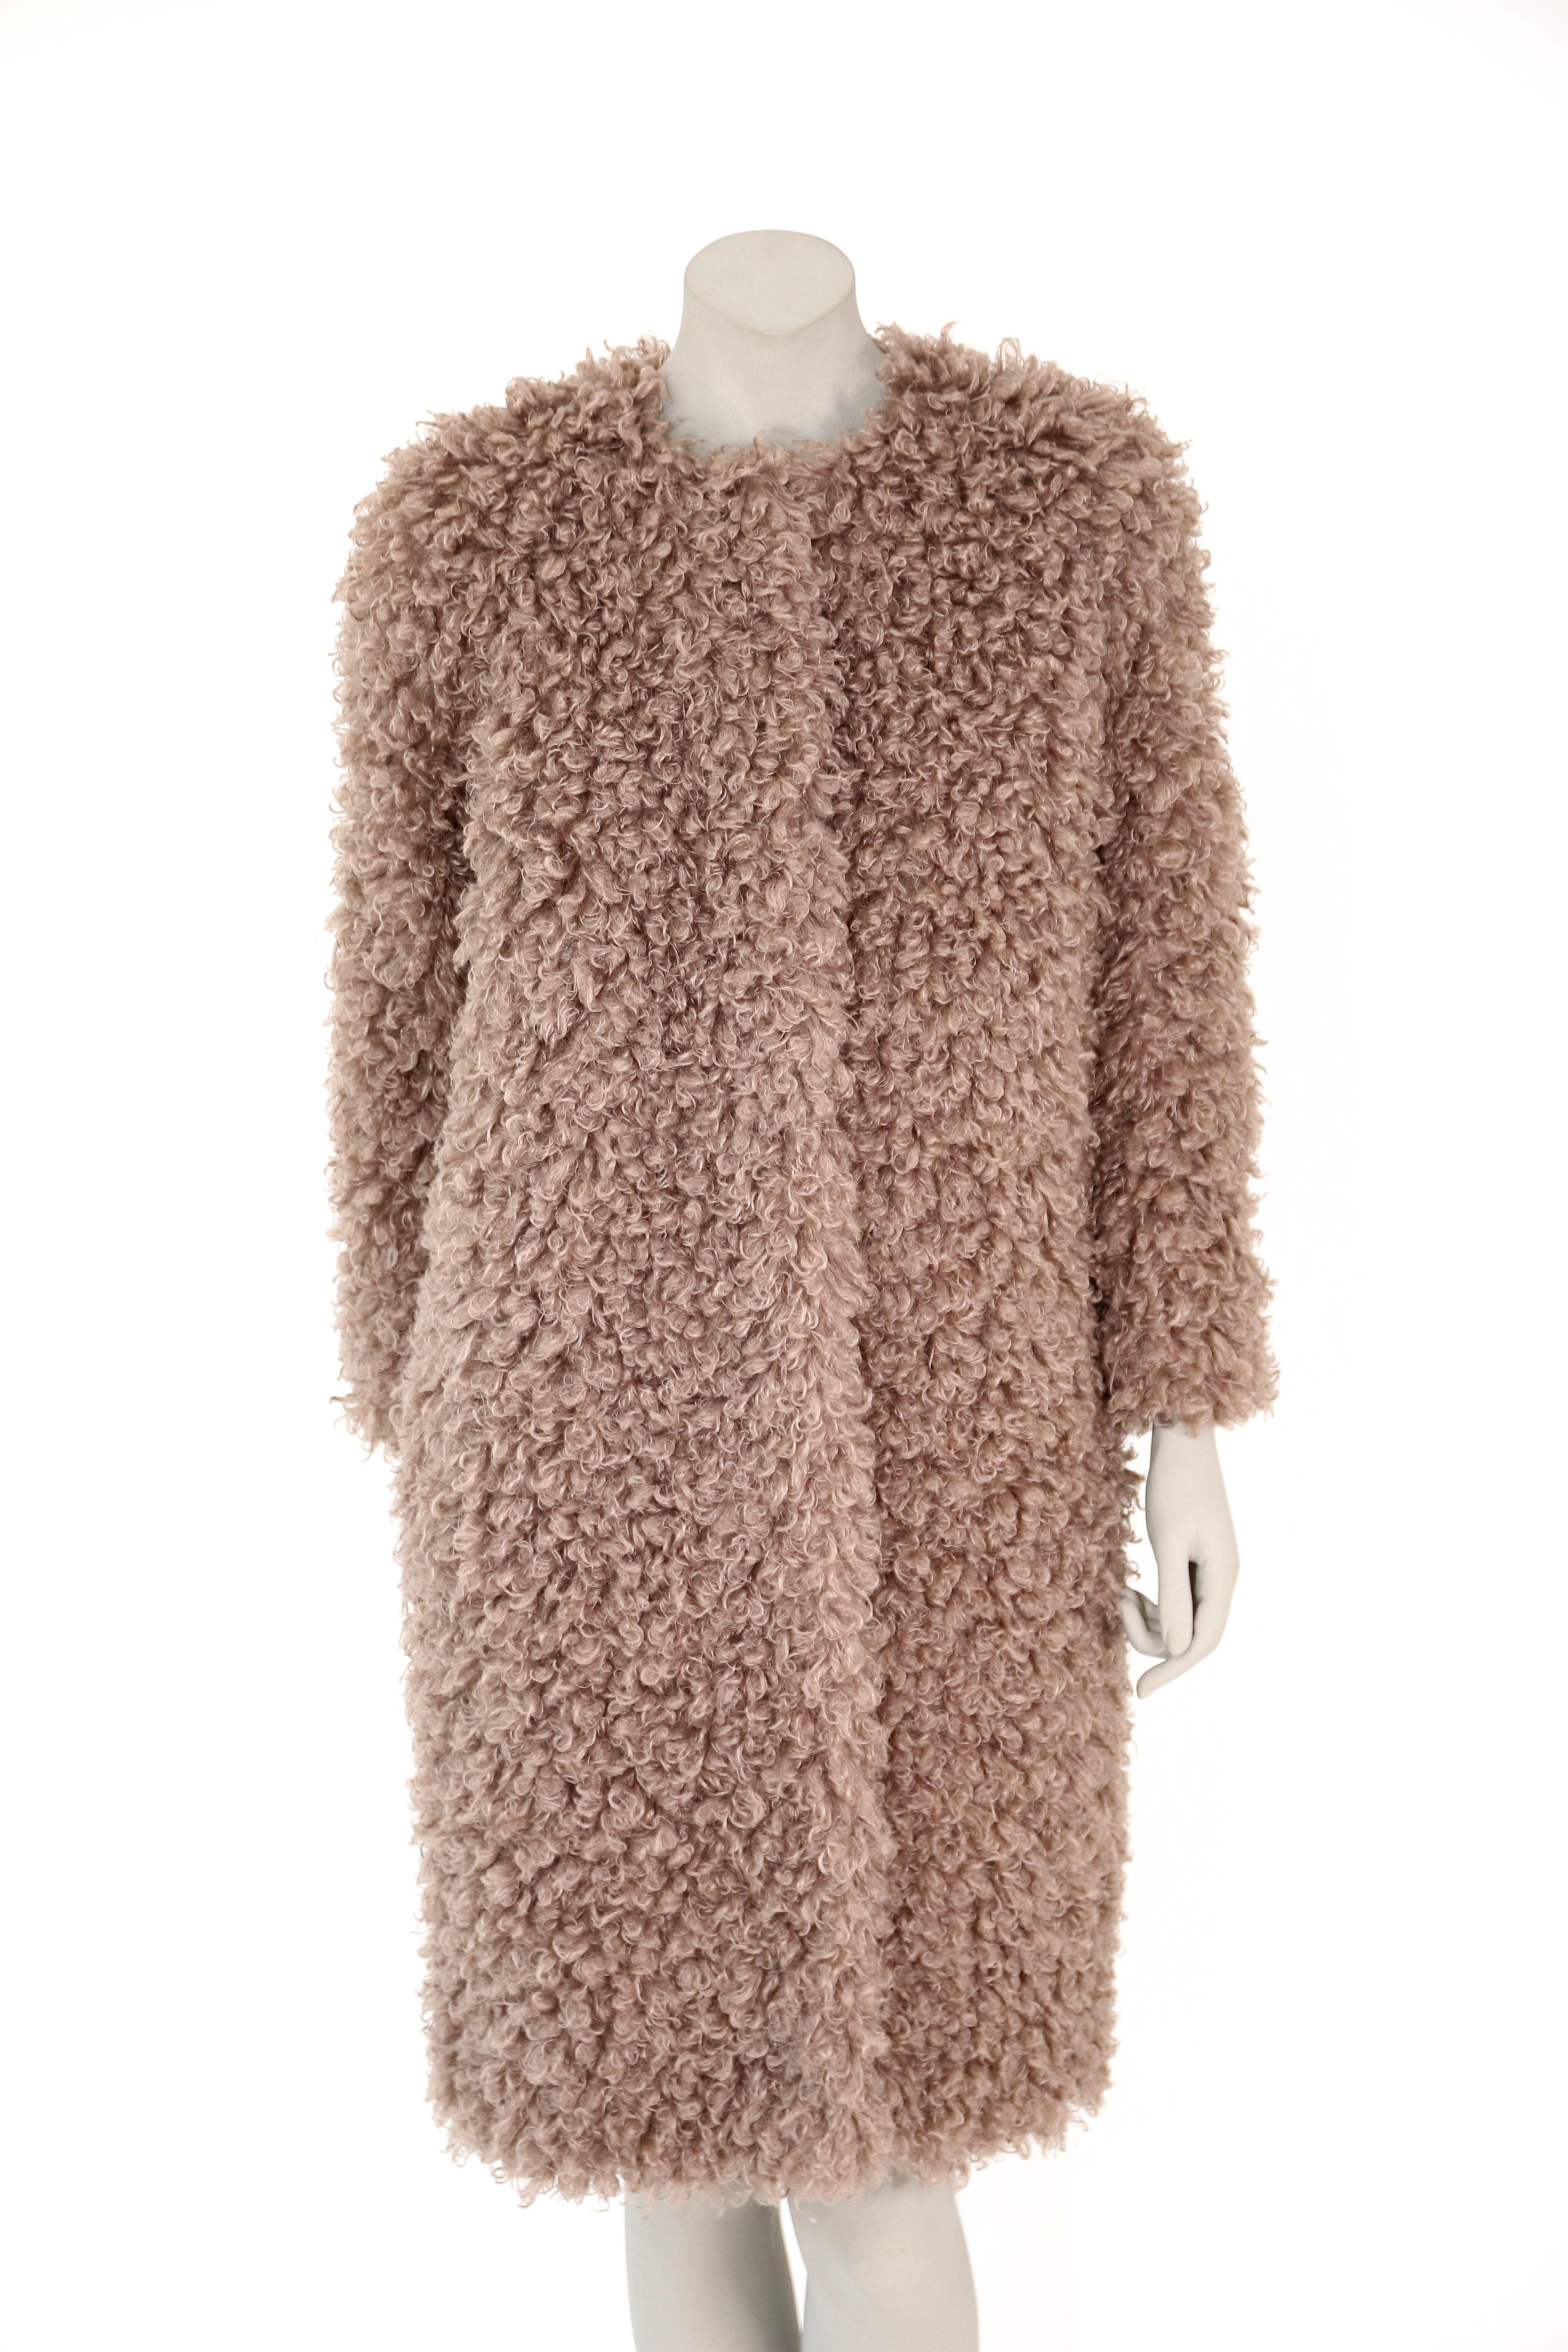 The Coco Pelush faux fur curly boucle' poodle coat is a one of a kind exclusive piece. Featuring the highest quality man made pelage the sophisticated mushroom color is custom made for Pelush and it mimics the curly lamb fur. Soft, lightweight and